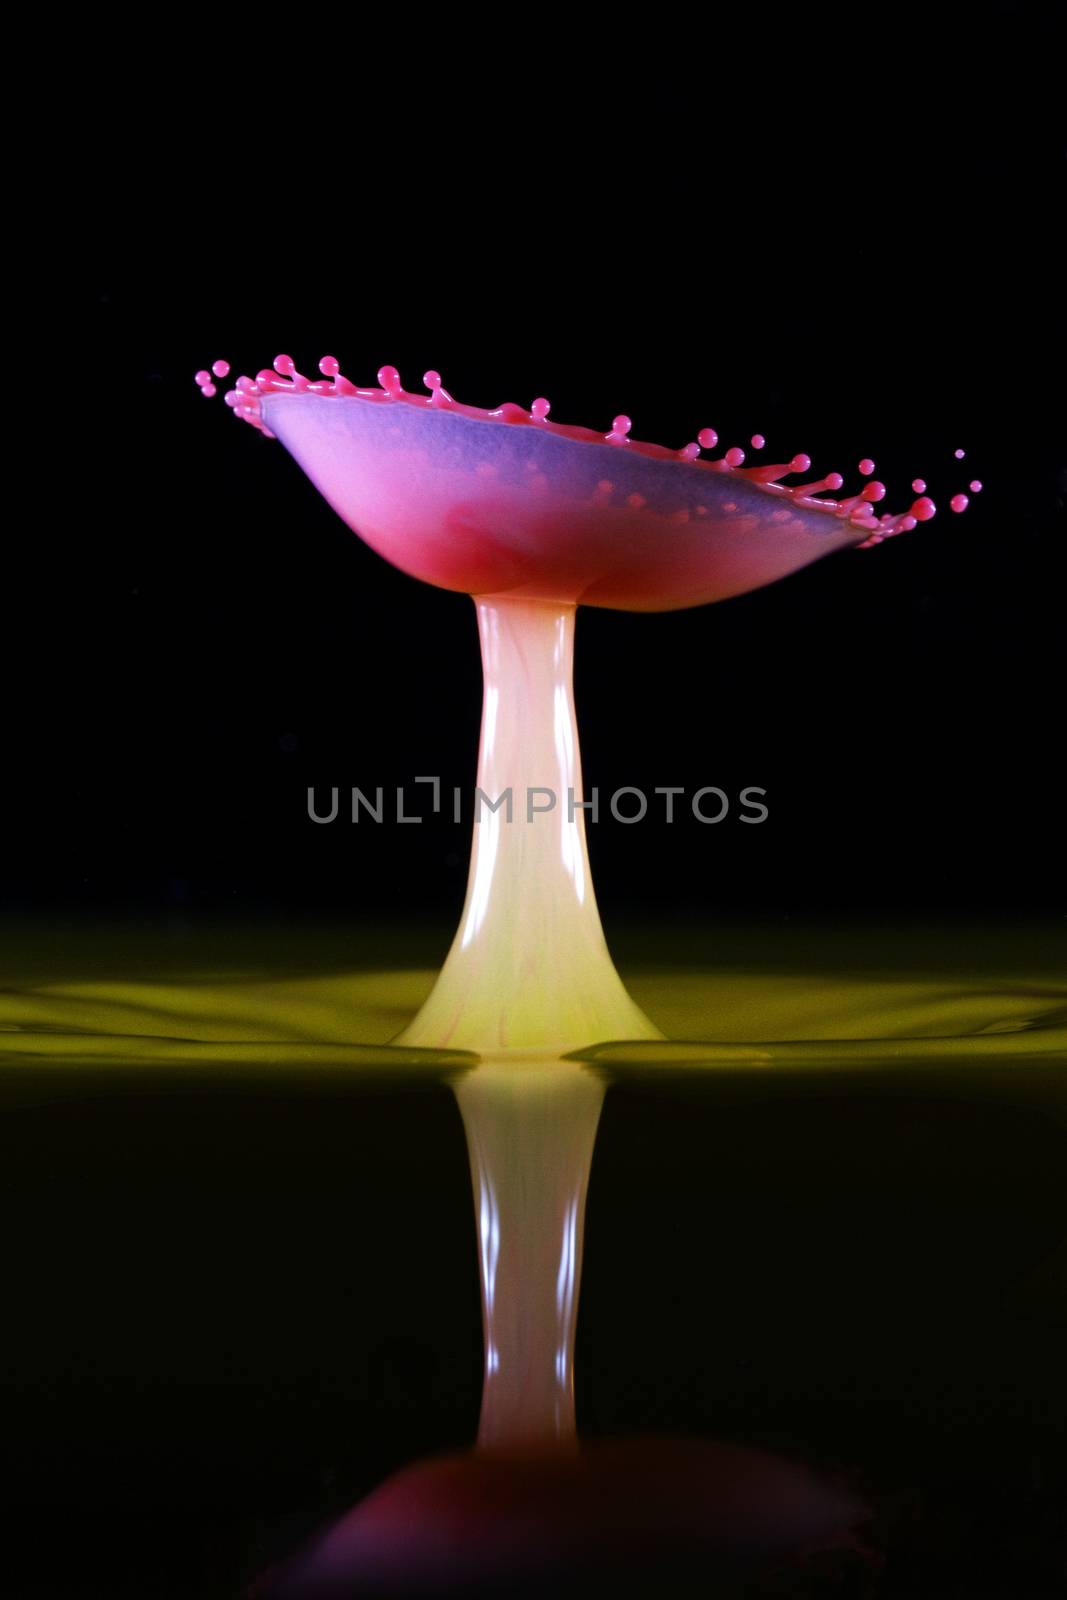 Red liquid is dropped into a tank of yellow water and two drops collide to form an inverted umbrella shape against a black background, with a water reflection. Liquid drop art, water drop photography